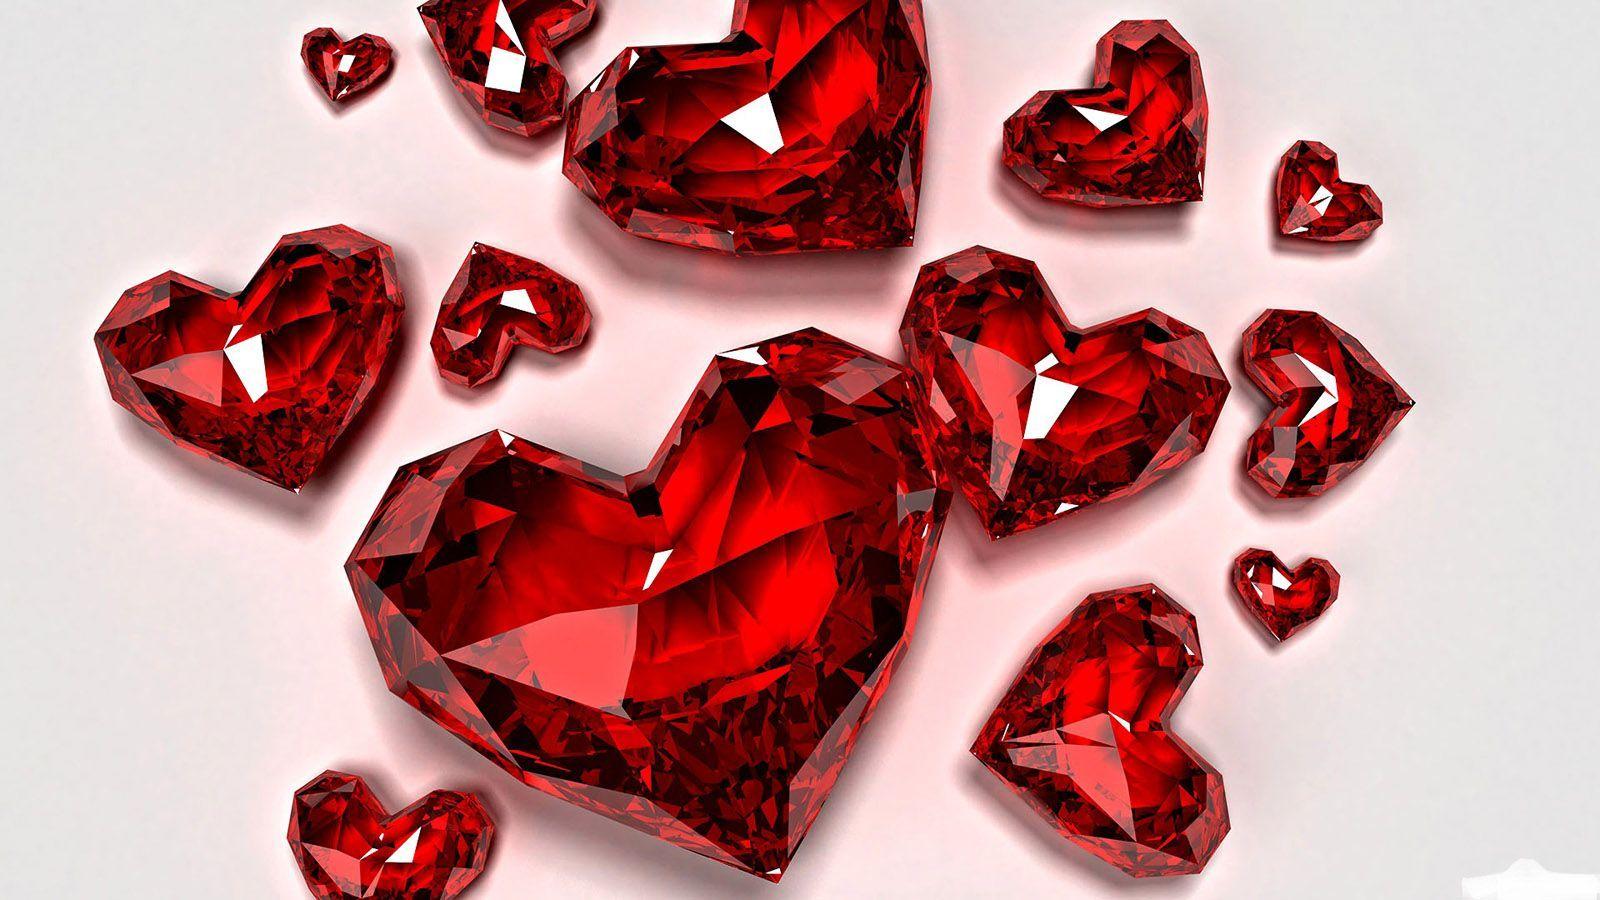 Happy Valentine's Day from all of us at Manfredi Jewels! #Valentinesday #love #valentines2014 #gifts #hearts #M. Heart wallpaper, Red heart, Heart shaped diamond